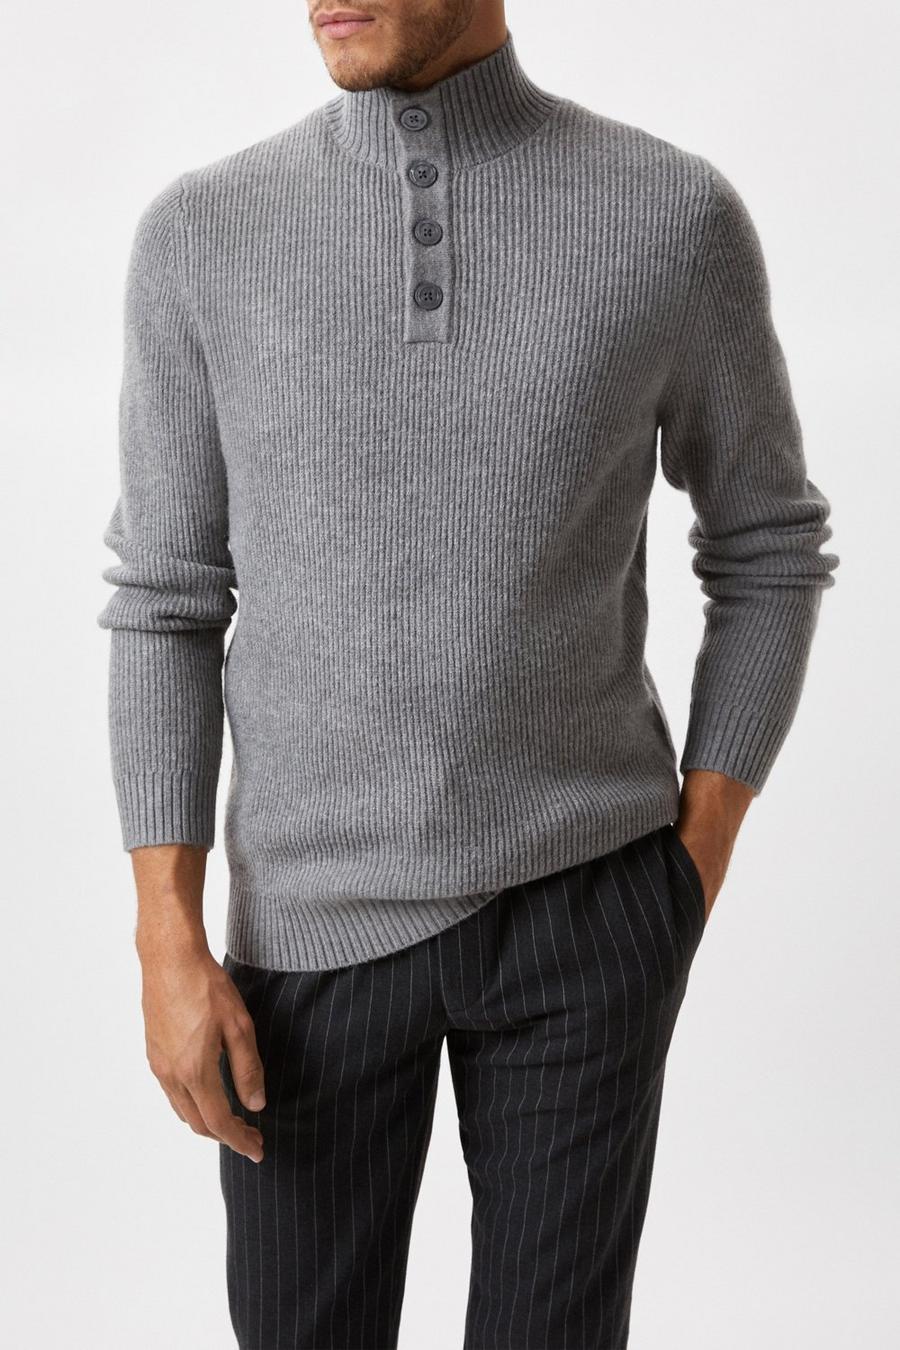 Super Soft Grey Button Up Knitted Funnel